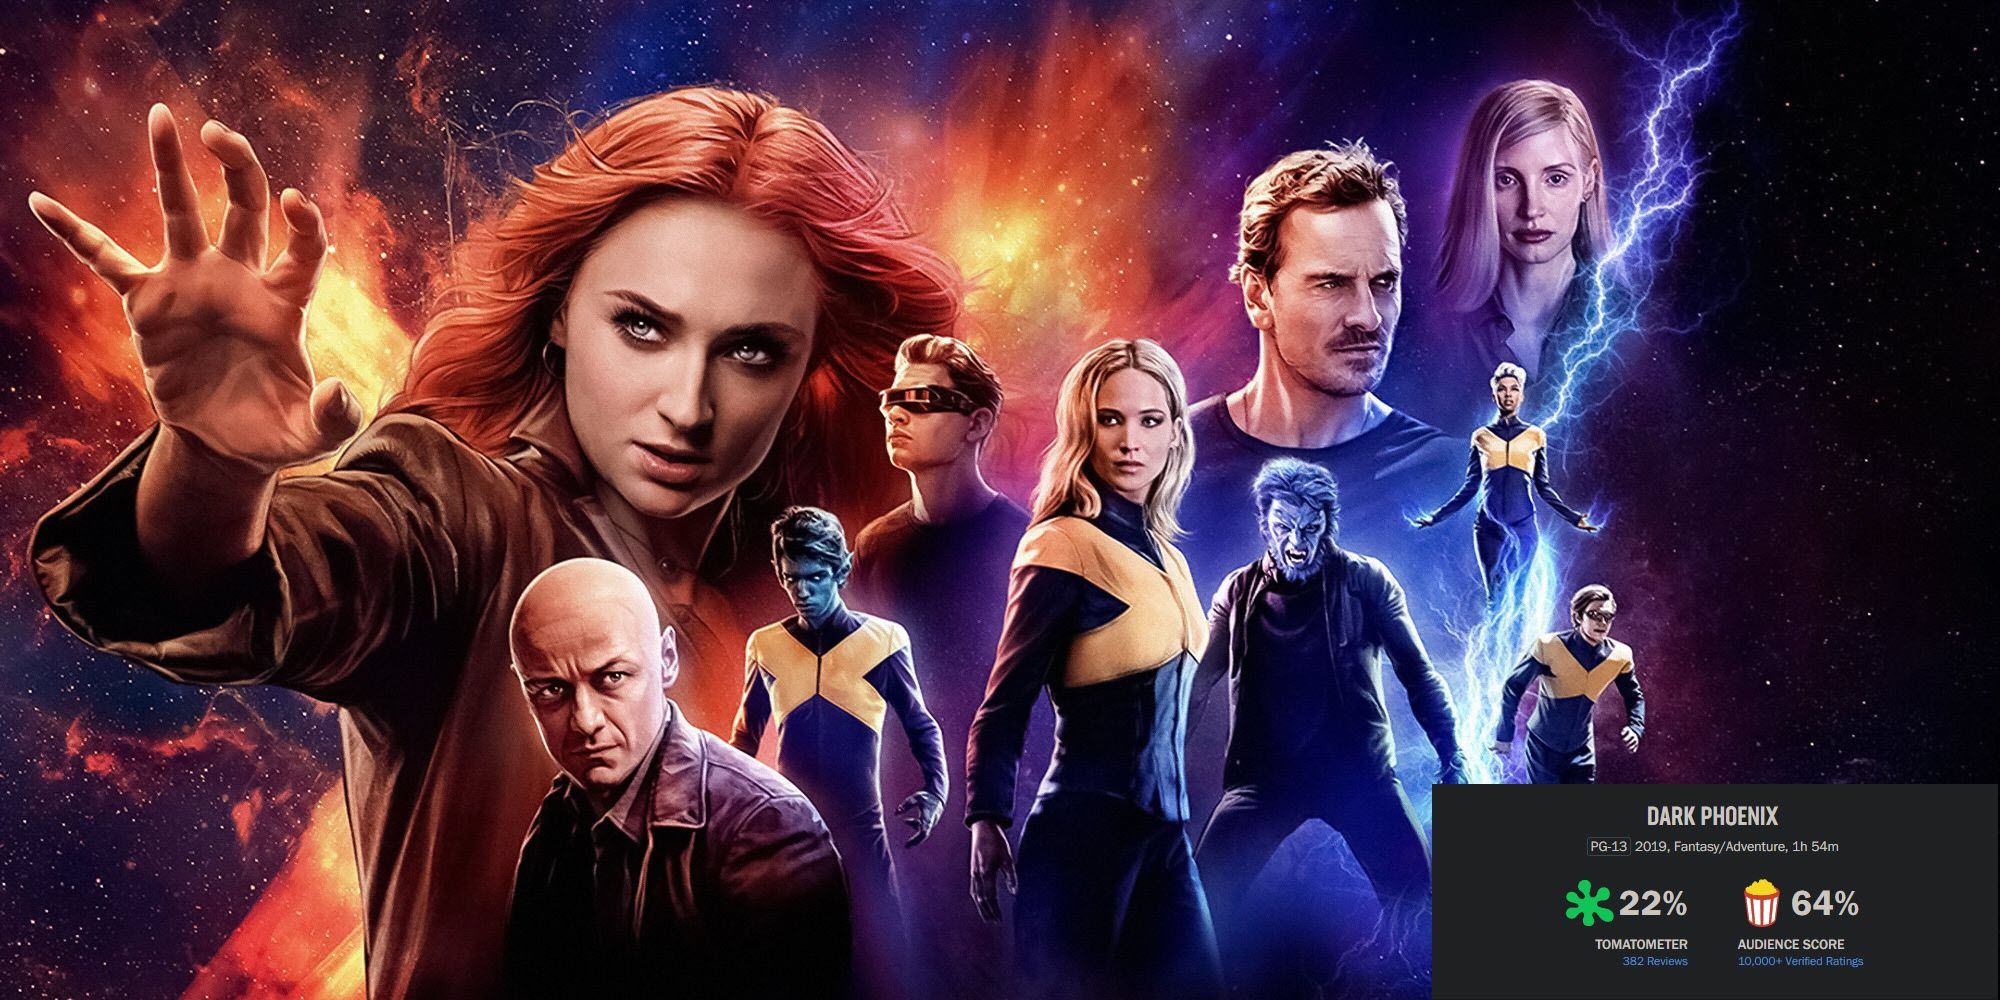 poster for the film X Men Dark Phoenix featuring the cast including Sophie Turner James McAvoy